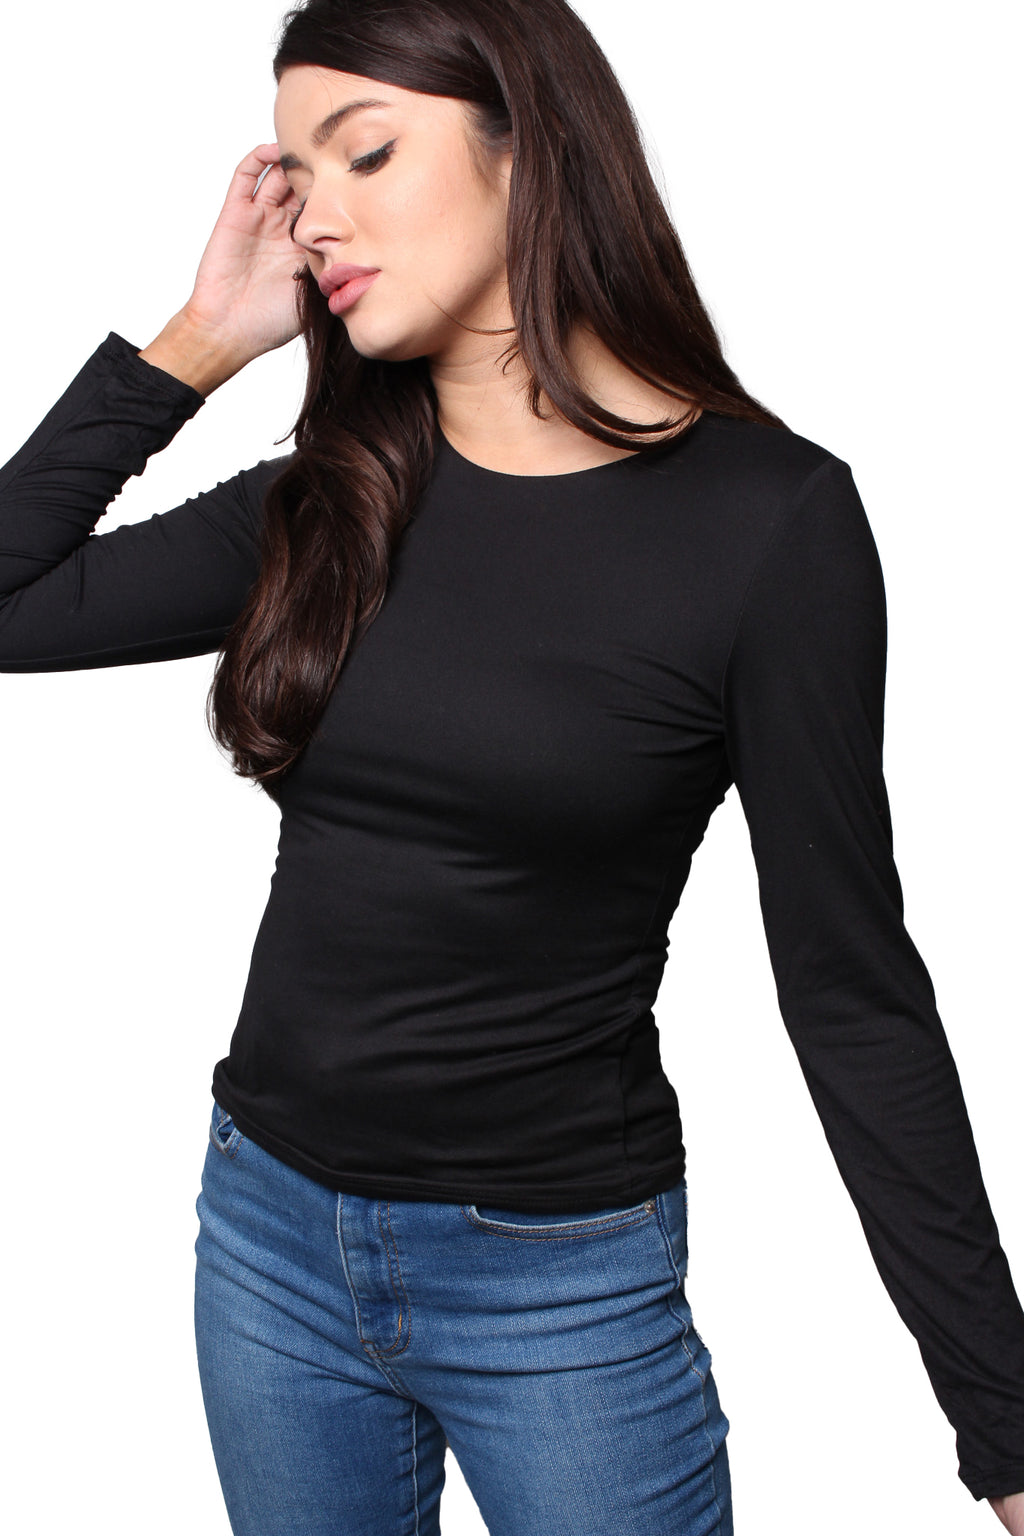 Women's Long Sleeves Round Neck Fitted Top